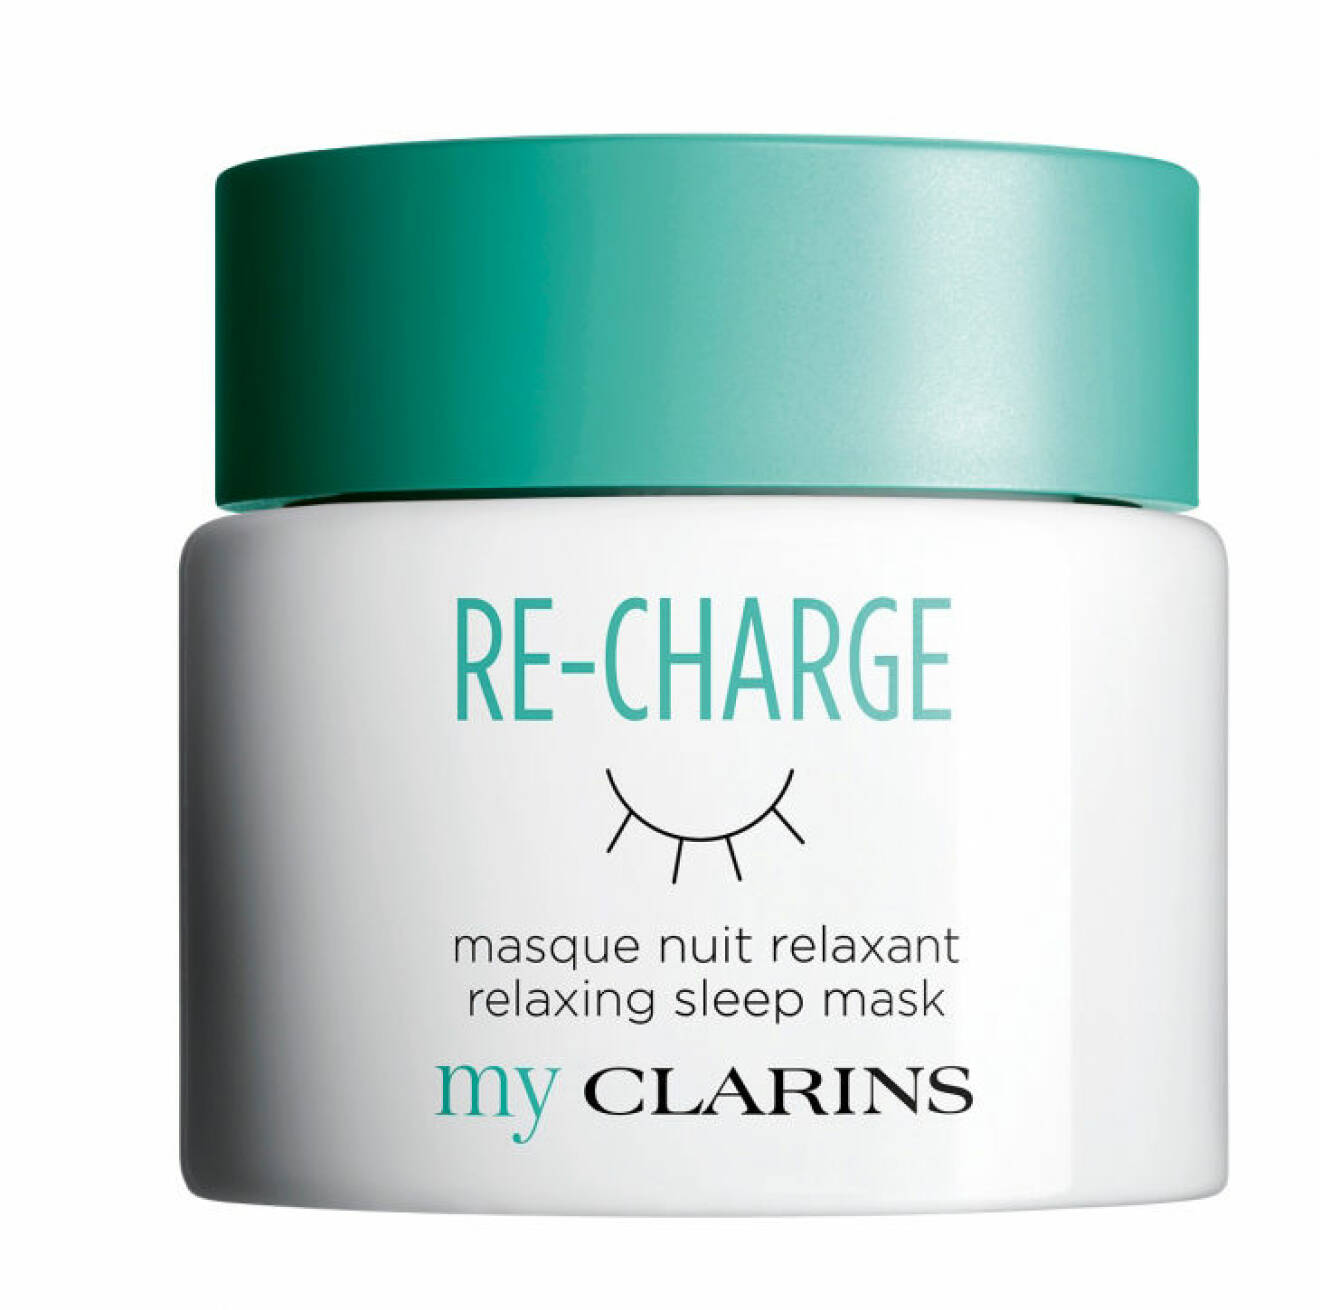 Re-charge relaxing sleep mask från Clarins